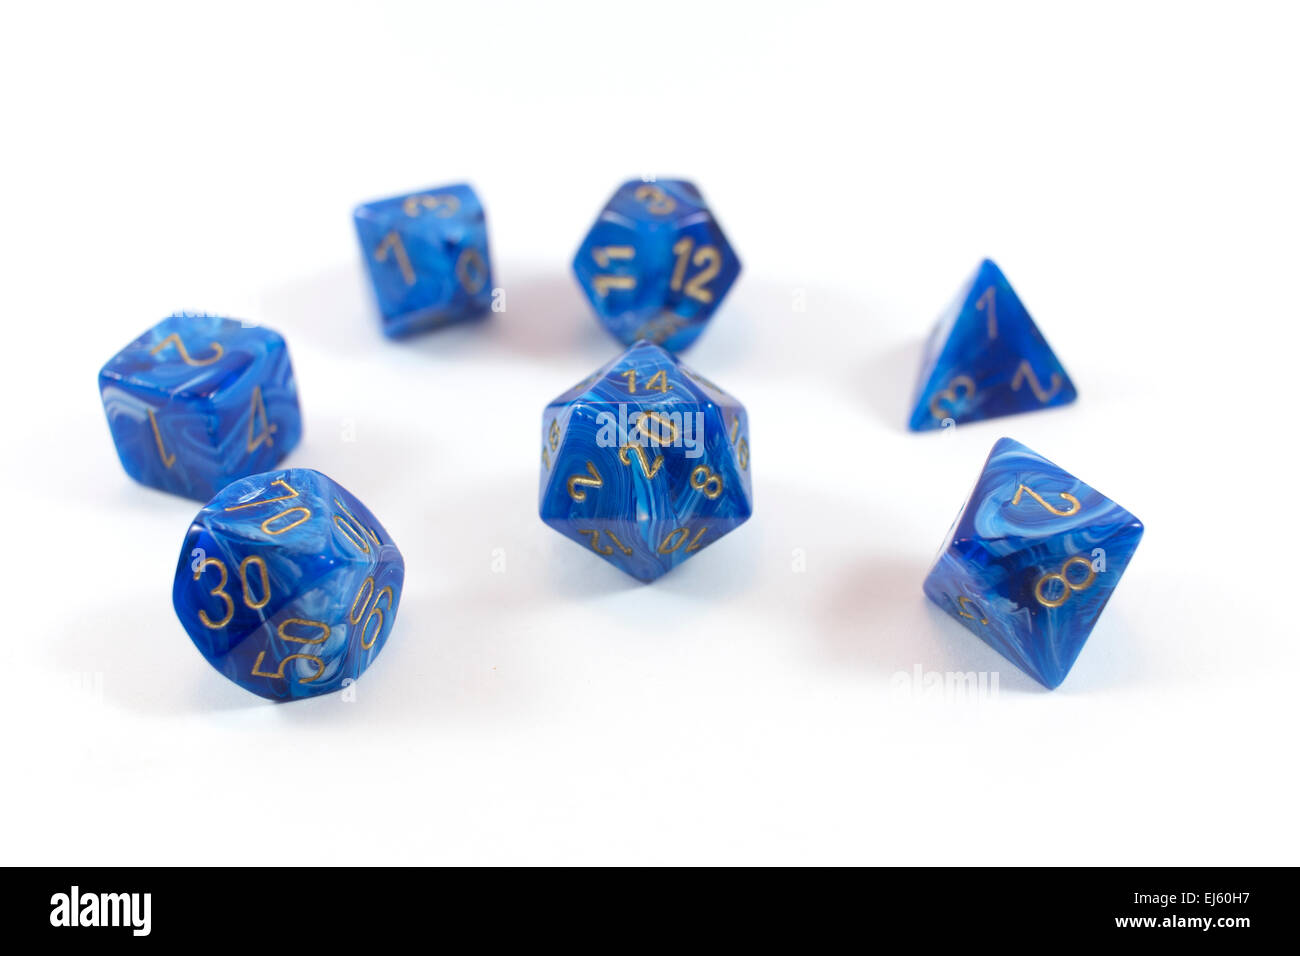 Polyhedral dice Stock Photo